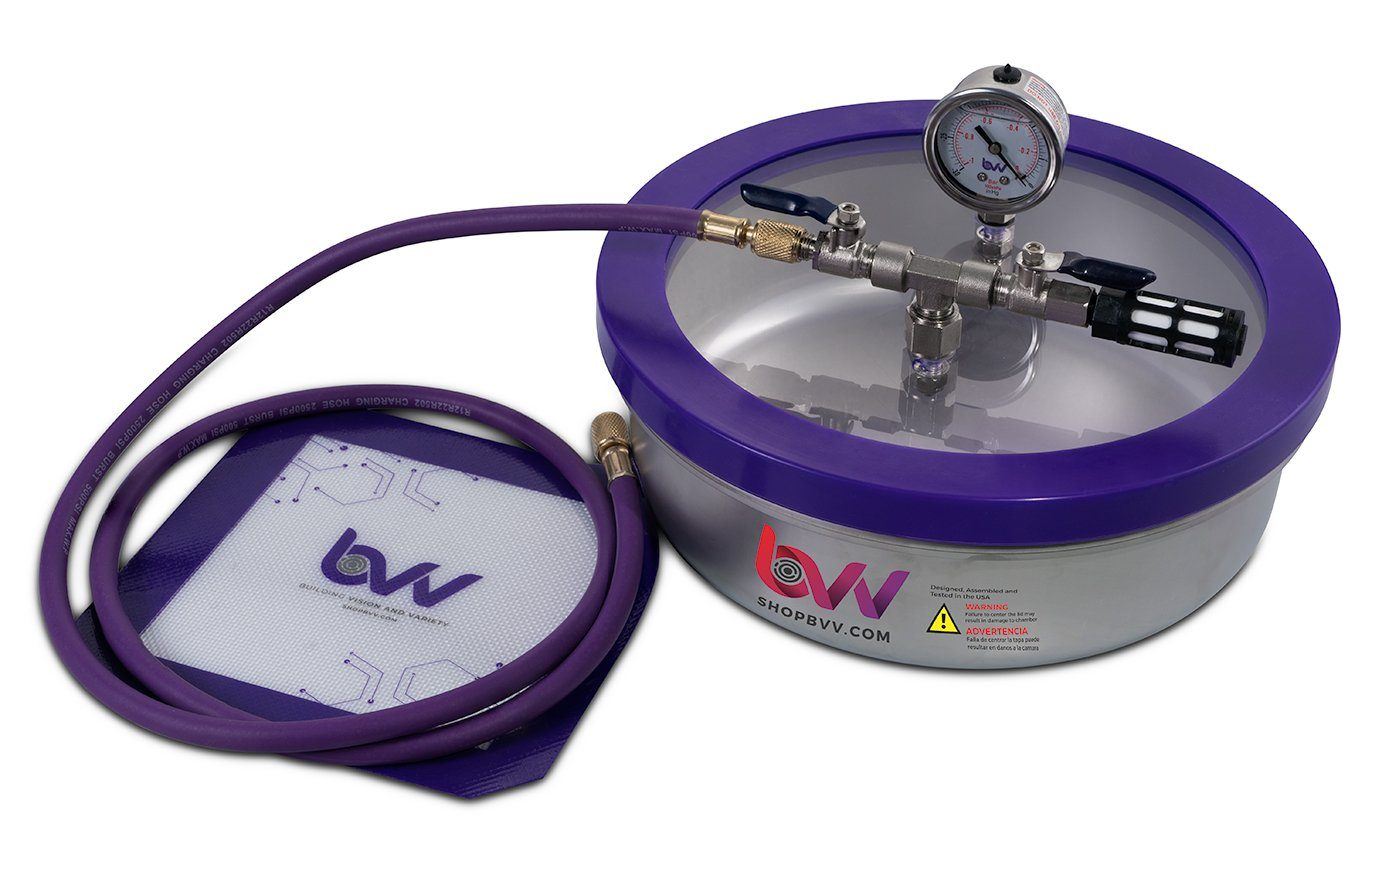 Best Value Vacs 1 Gallon Flat Stainless Steel Vacuum Chamber W/GLASS LID Shop All Categories BVV 